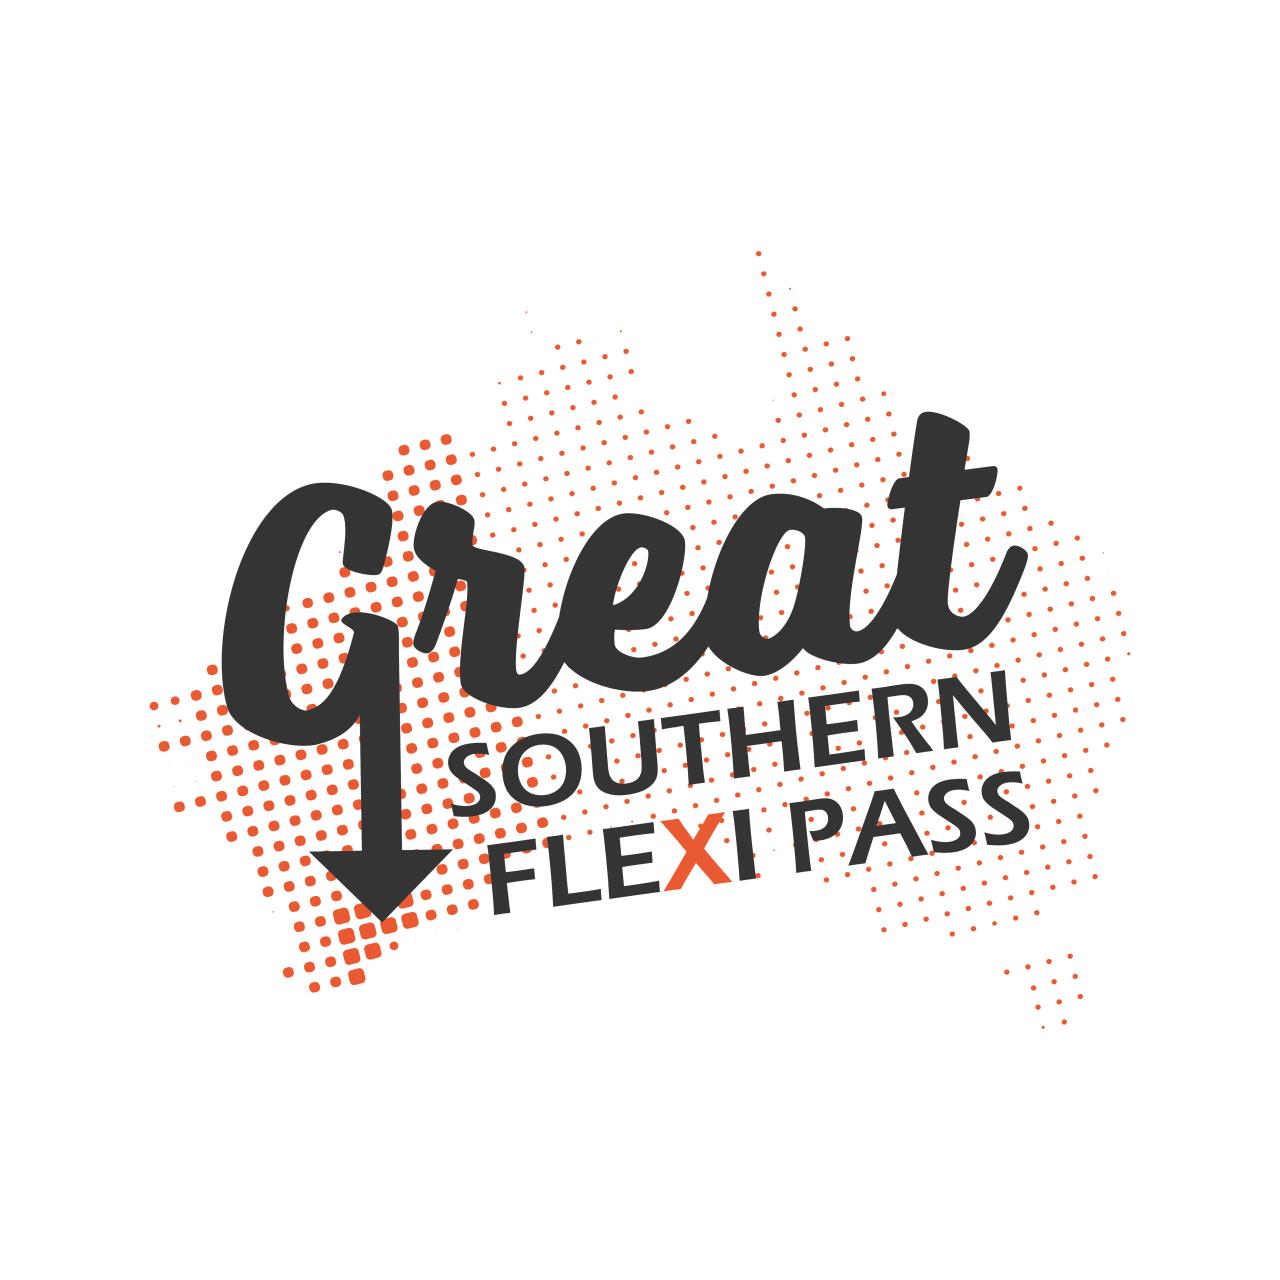 City launch Great Southern Flexi Pass